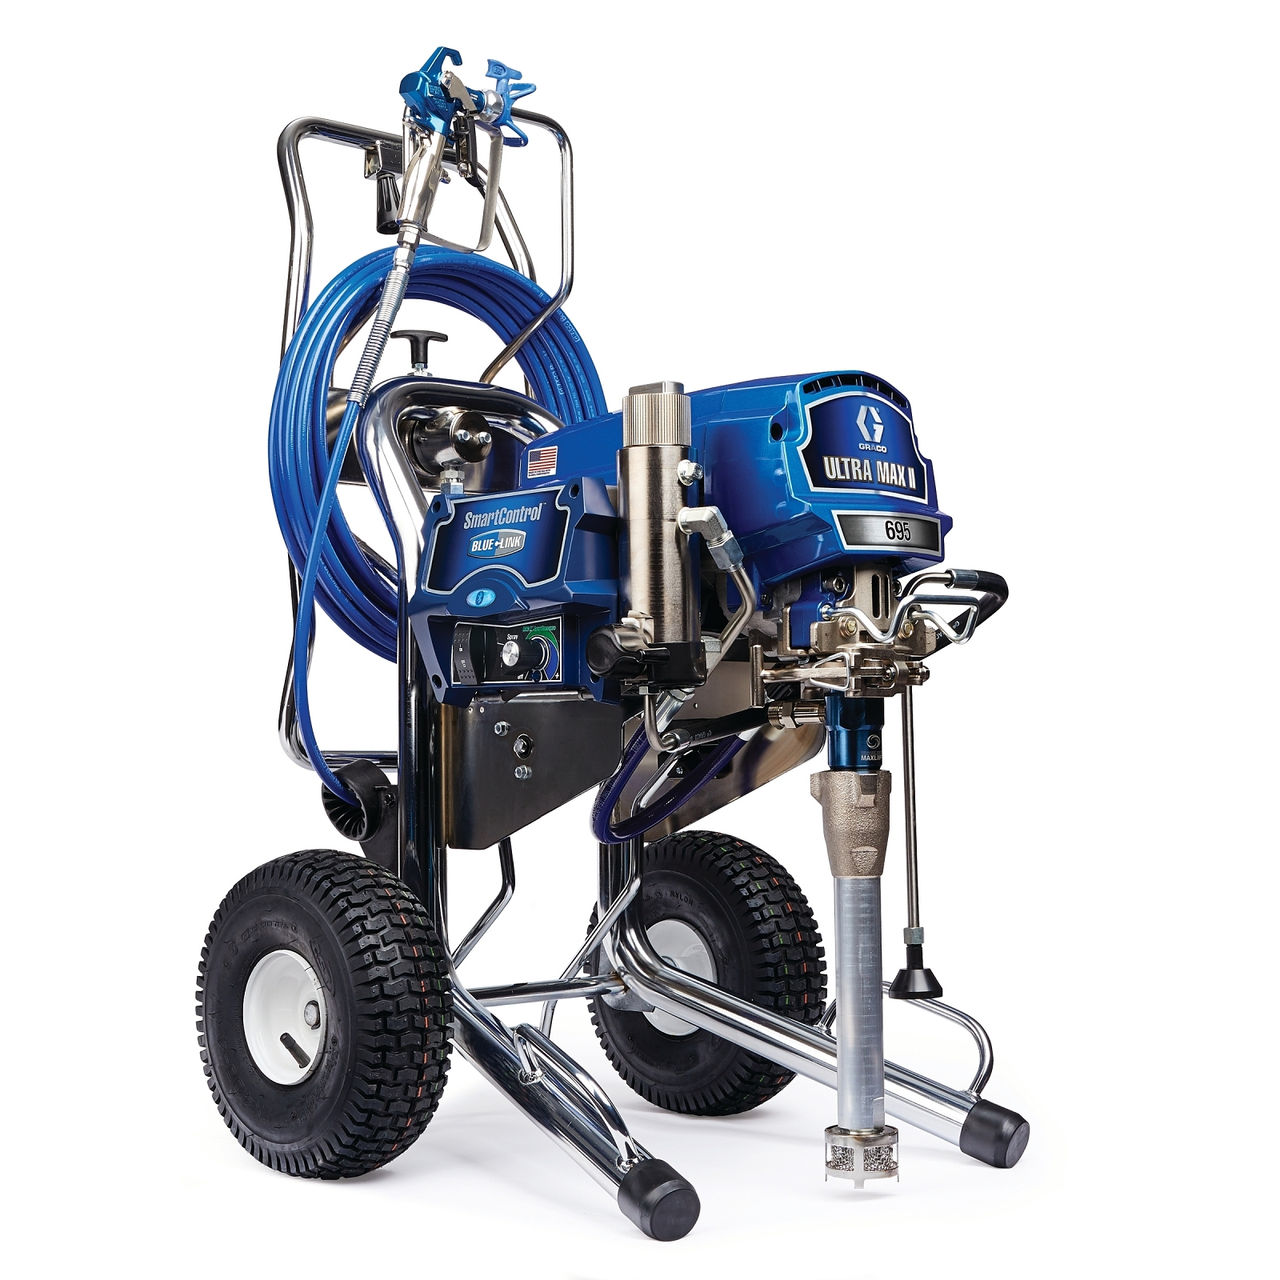 Graco Ultra Max II 695 Electric Airless Sprayer Systems